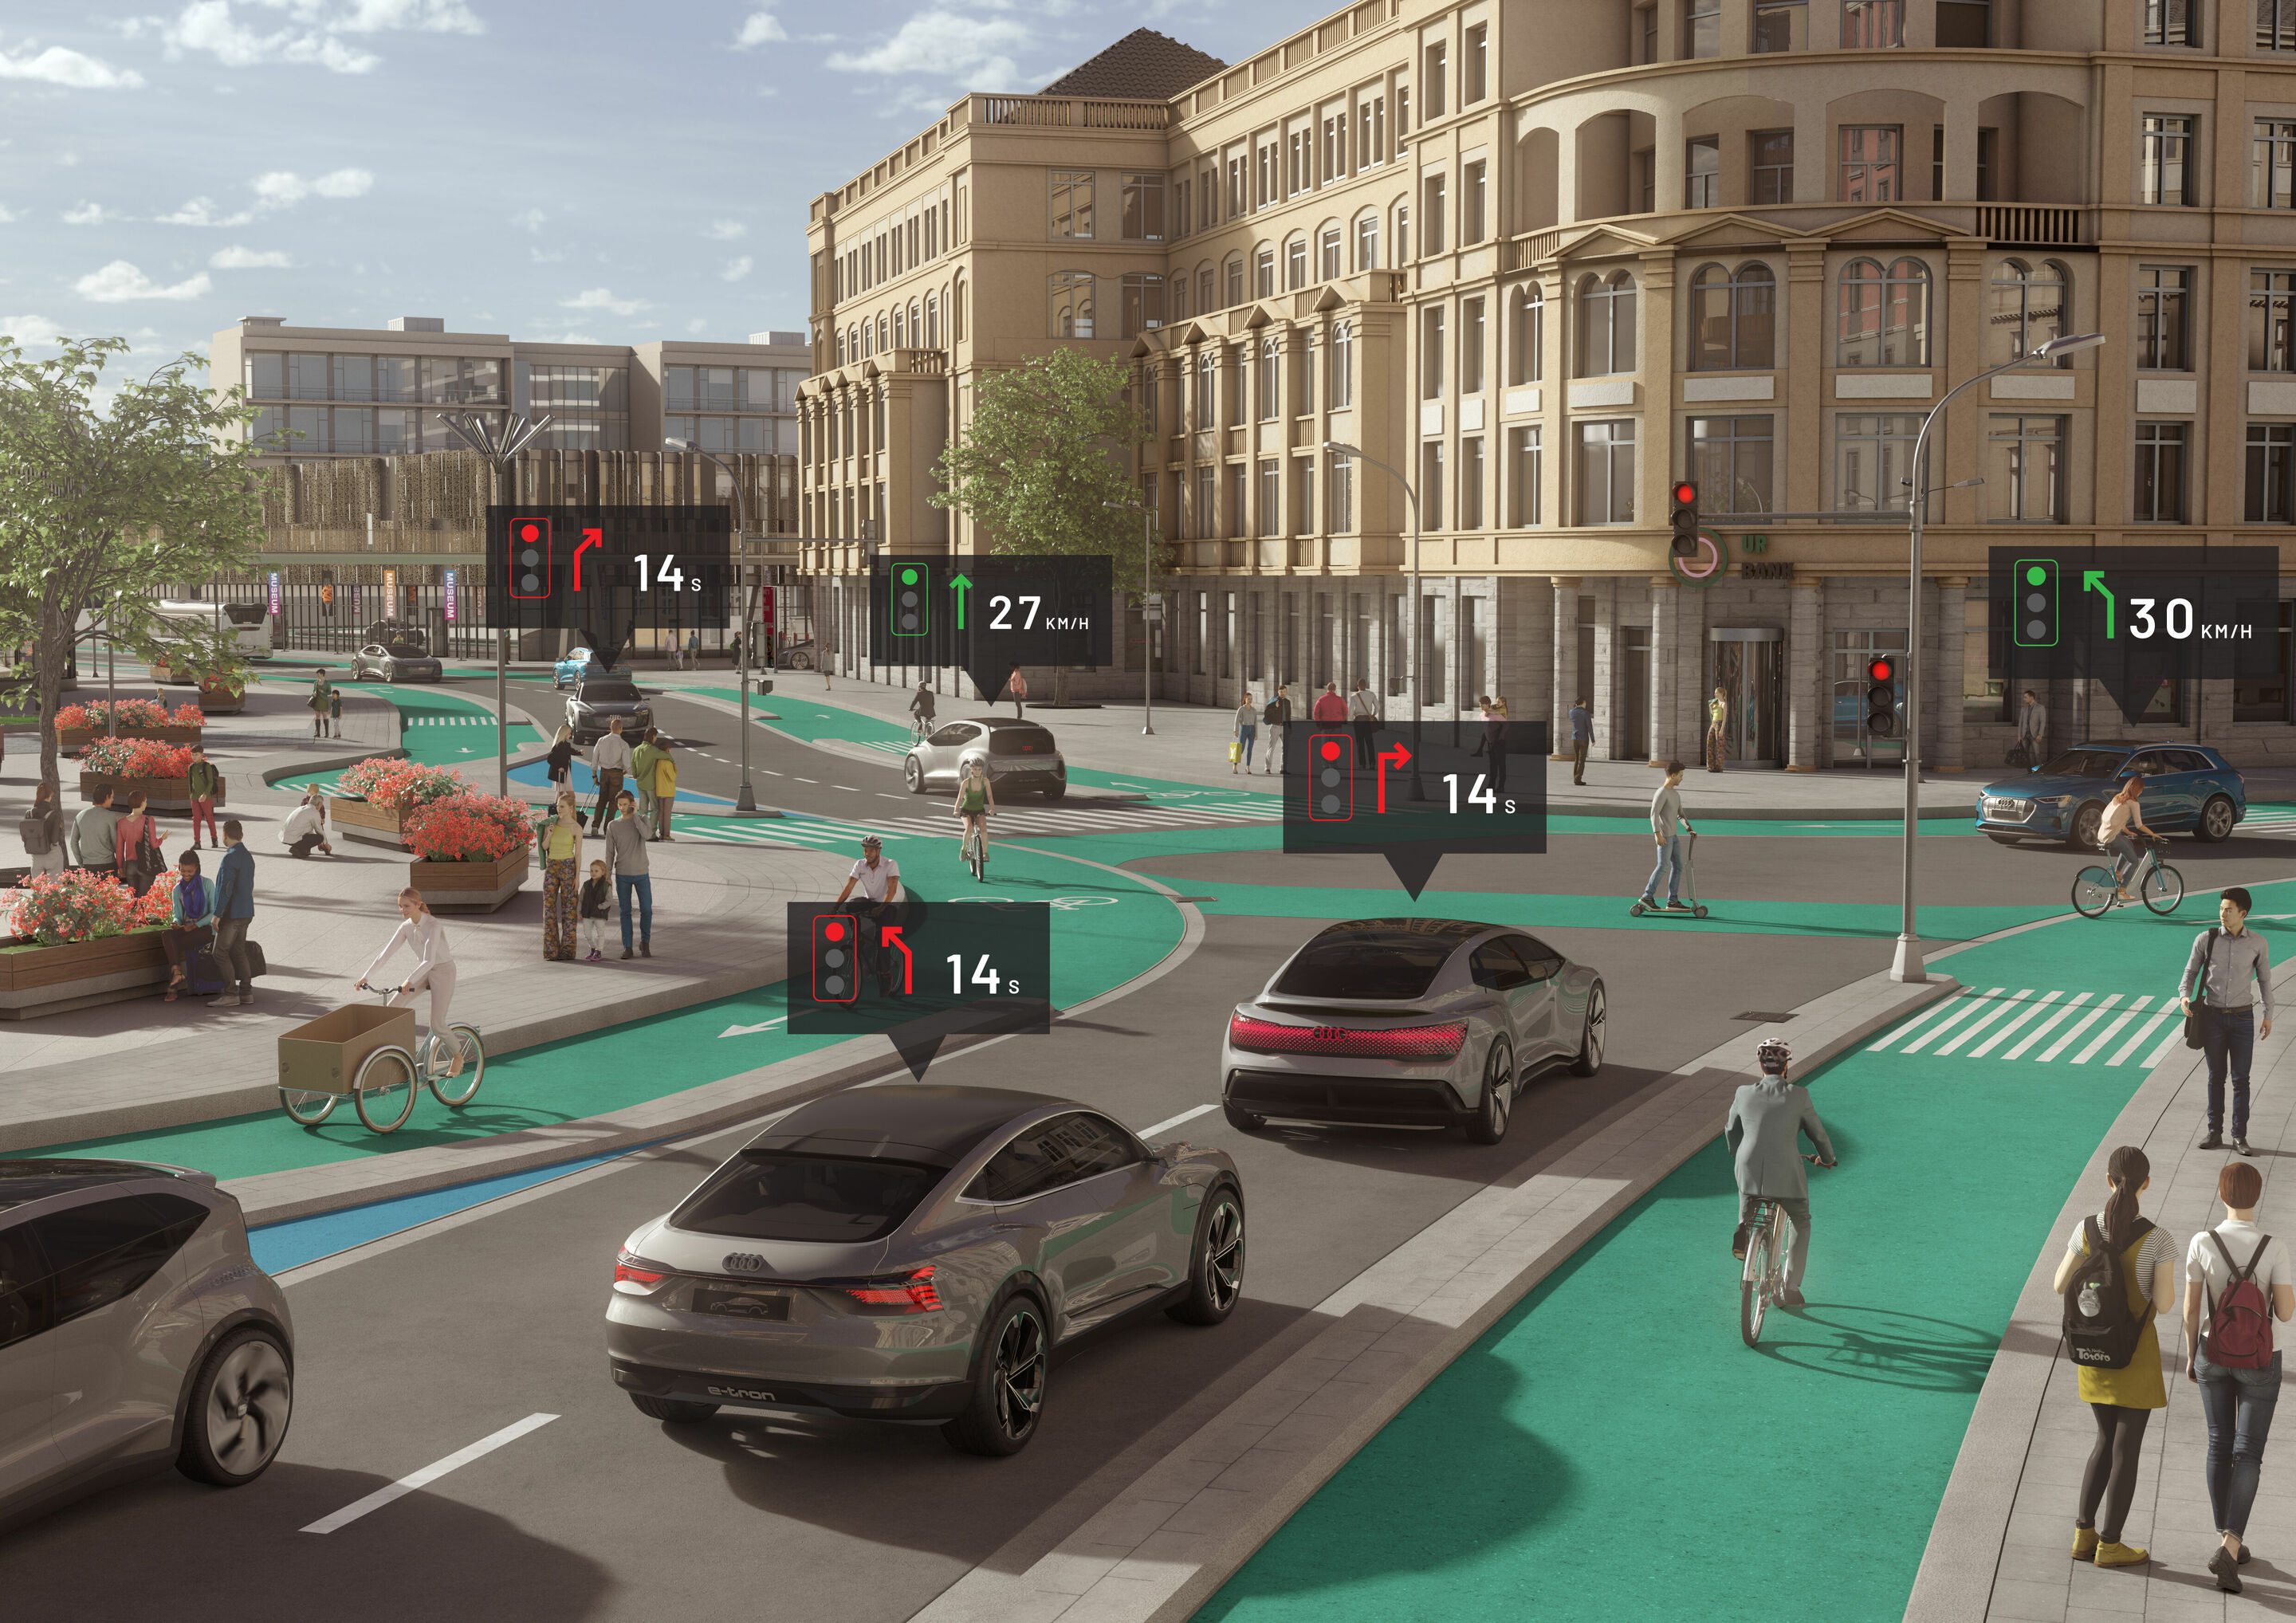 Audi study „25th Hour – Flow“: No Congestion in the City of the Future